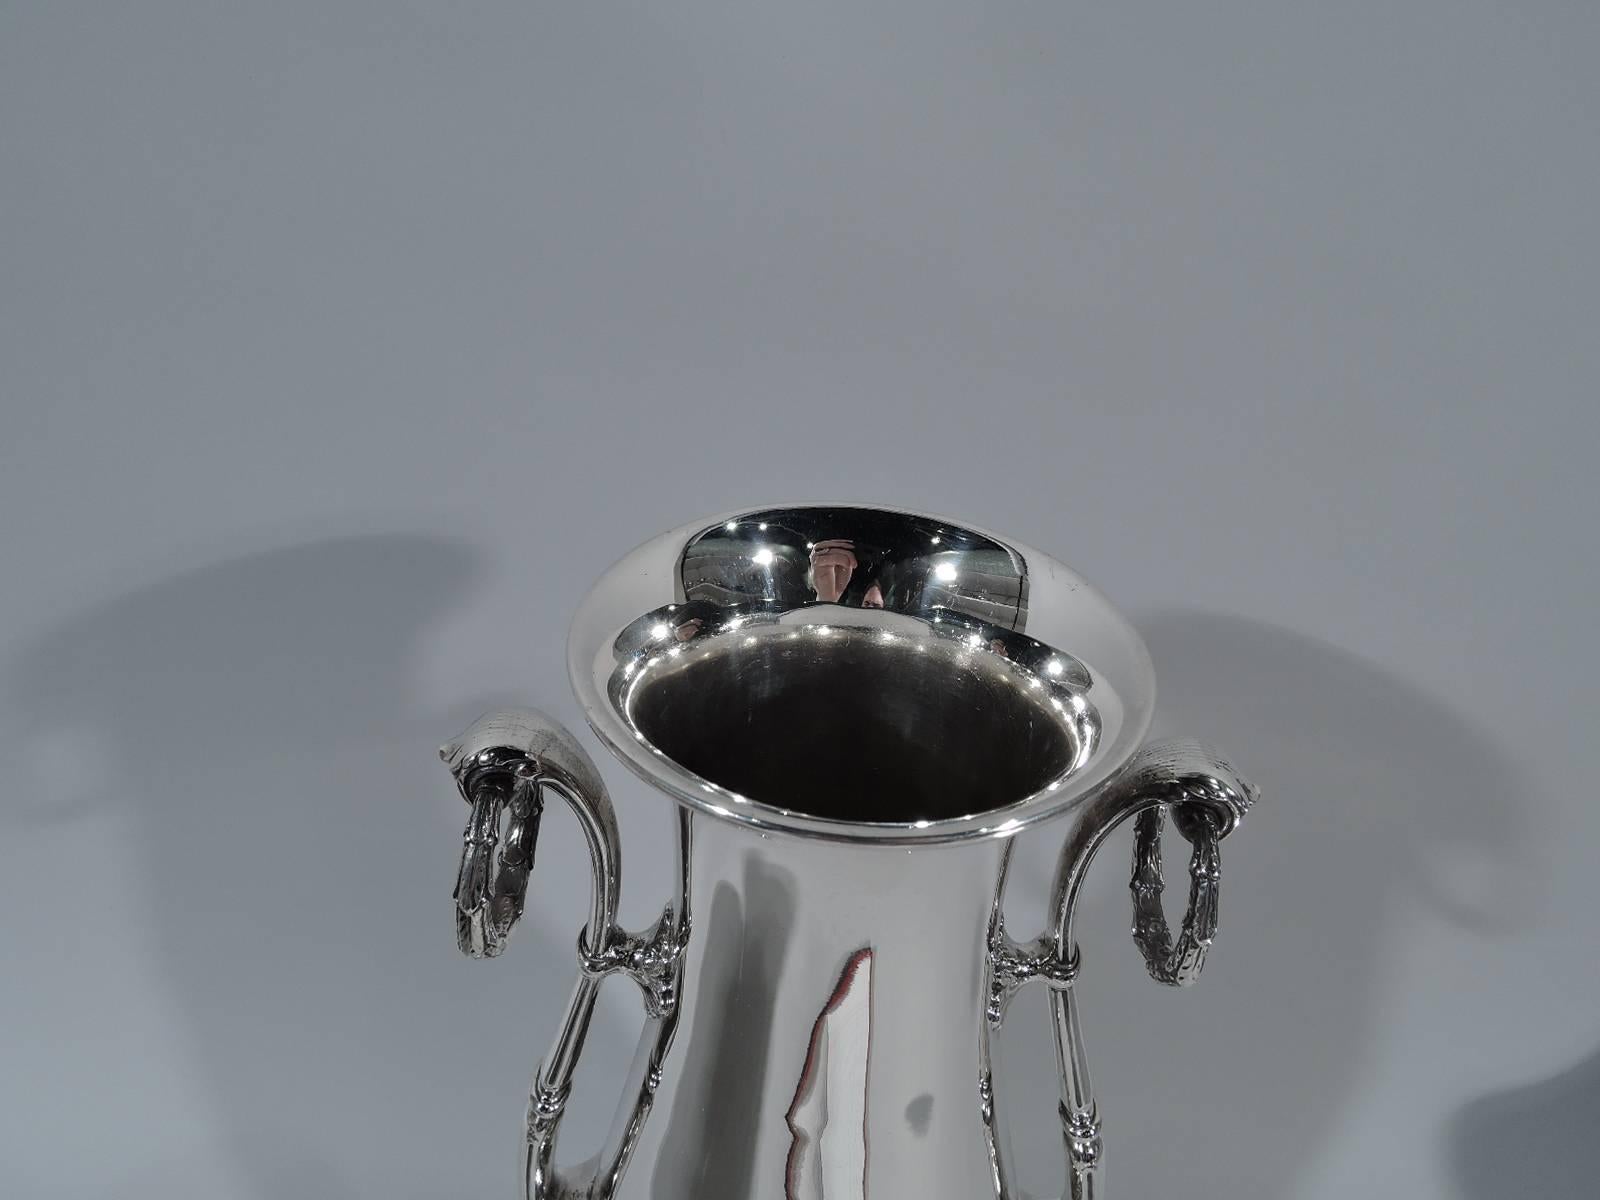 Tall and classical sterling silver trophy cup. Made by Gorham in Providence, circa 1910. Baluster body on domed foot. Leaf-capped and mounted s-scroll side handles with brackets and fixed laurel wreath rings. Unusual form with lots of room for